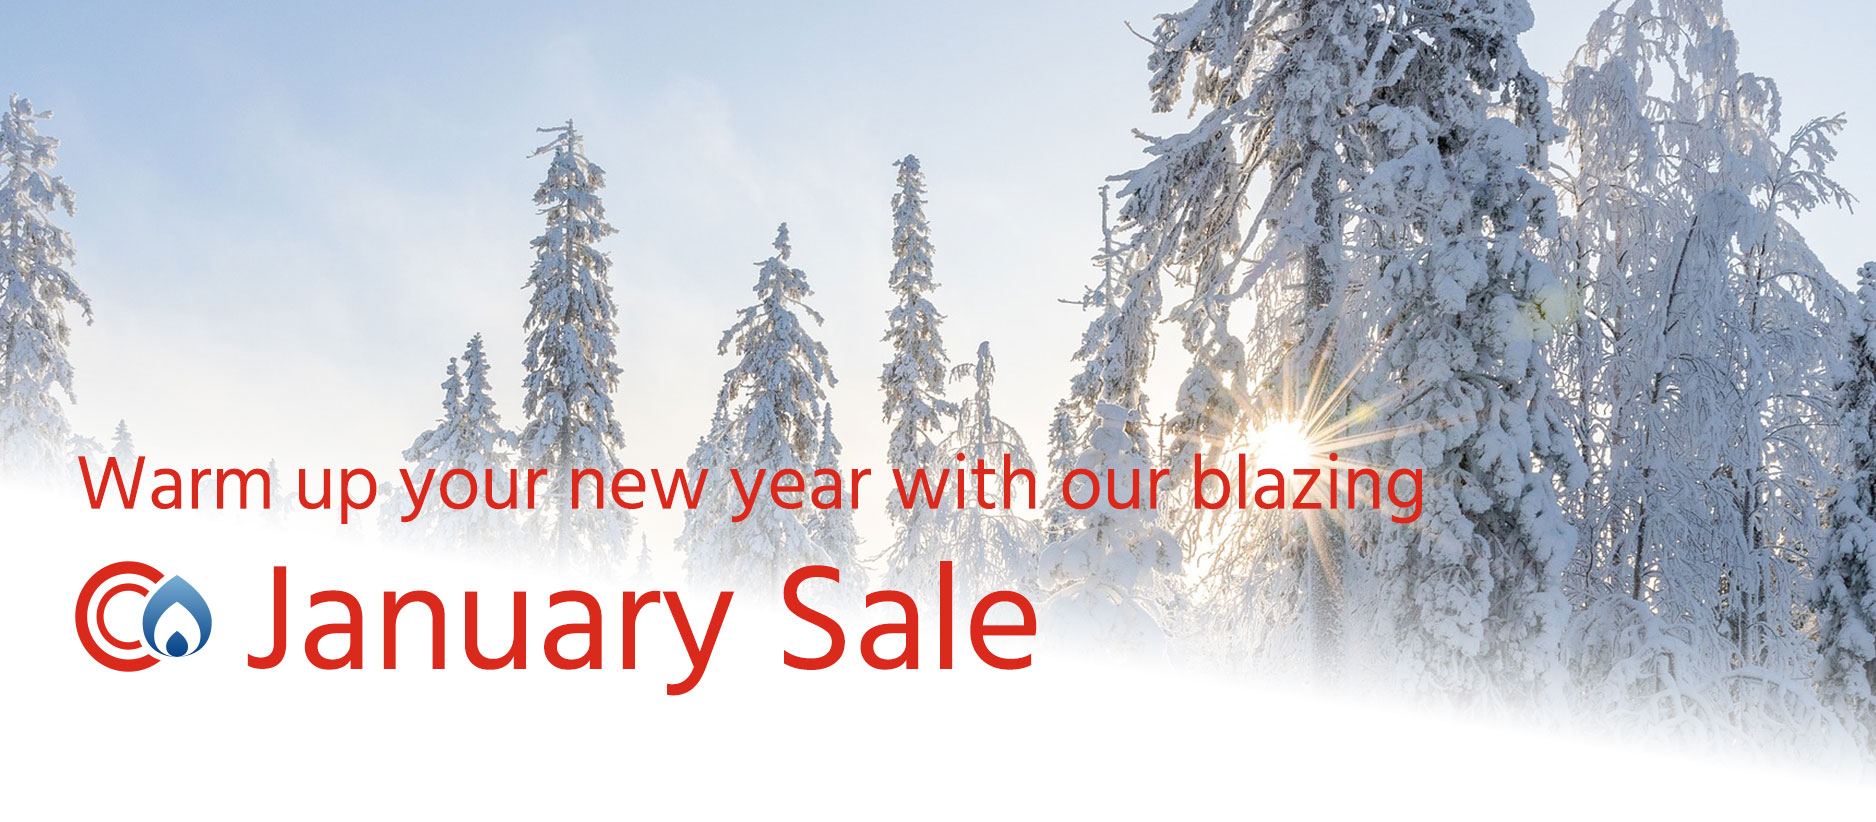 Warm up your new year with our blazing January Sale